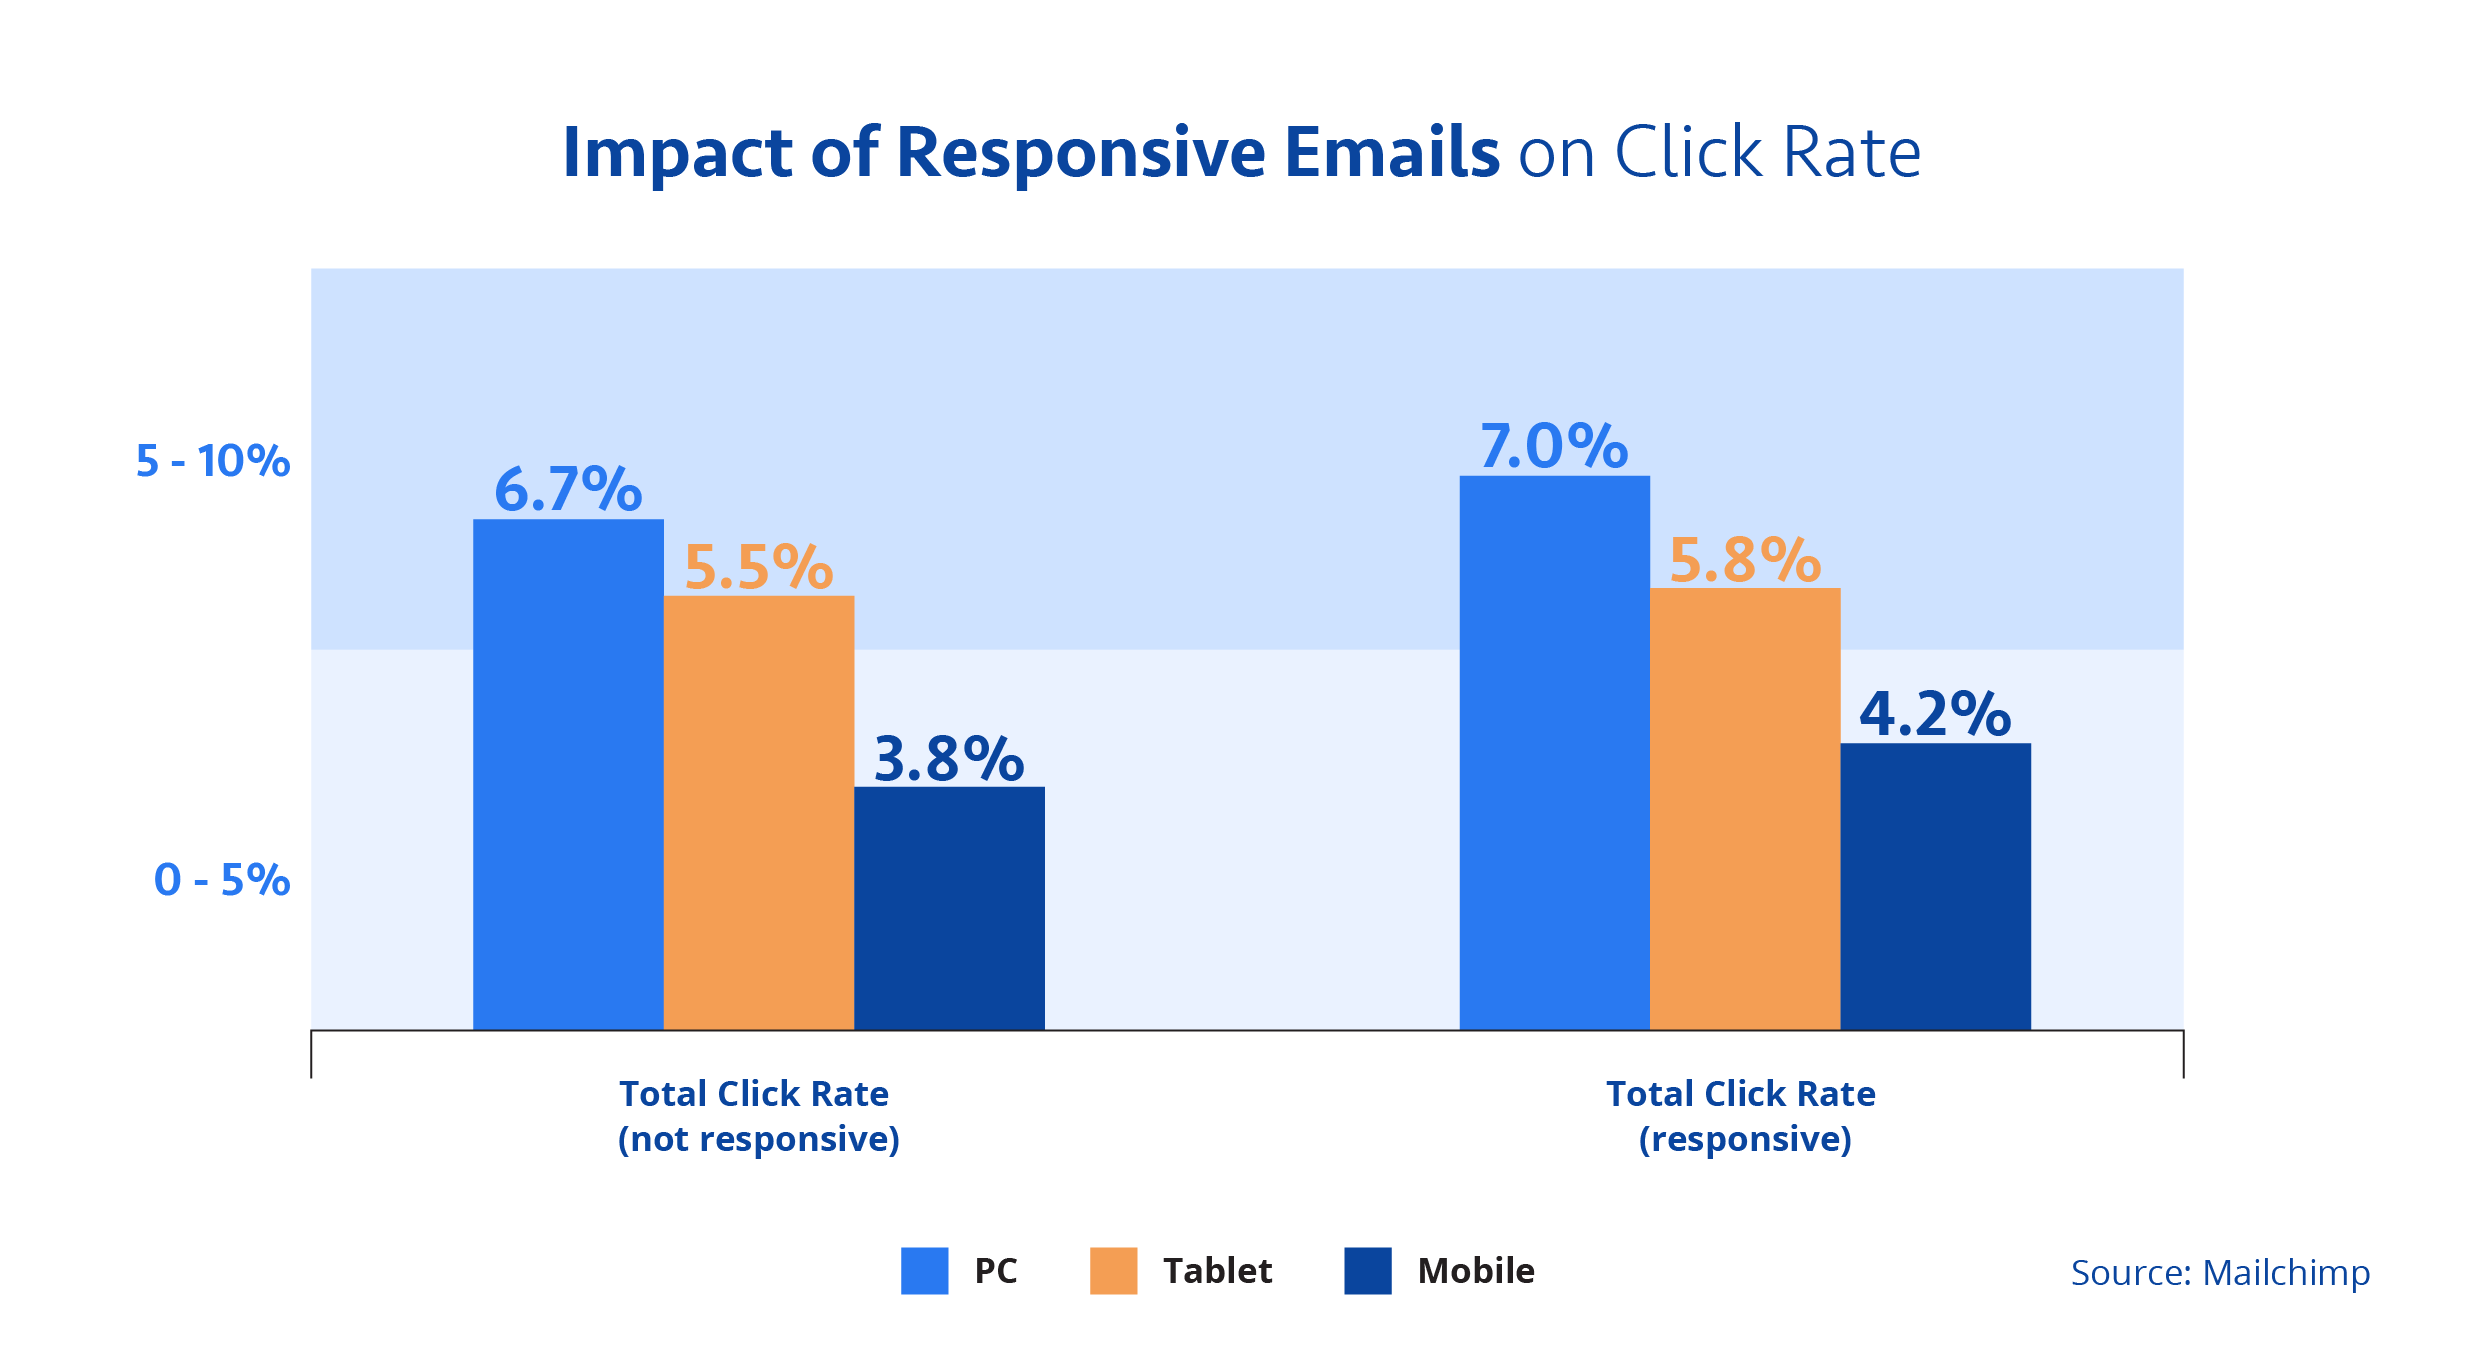 Impact of Responsive Emails on Click Rate